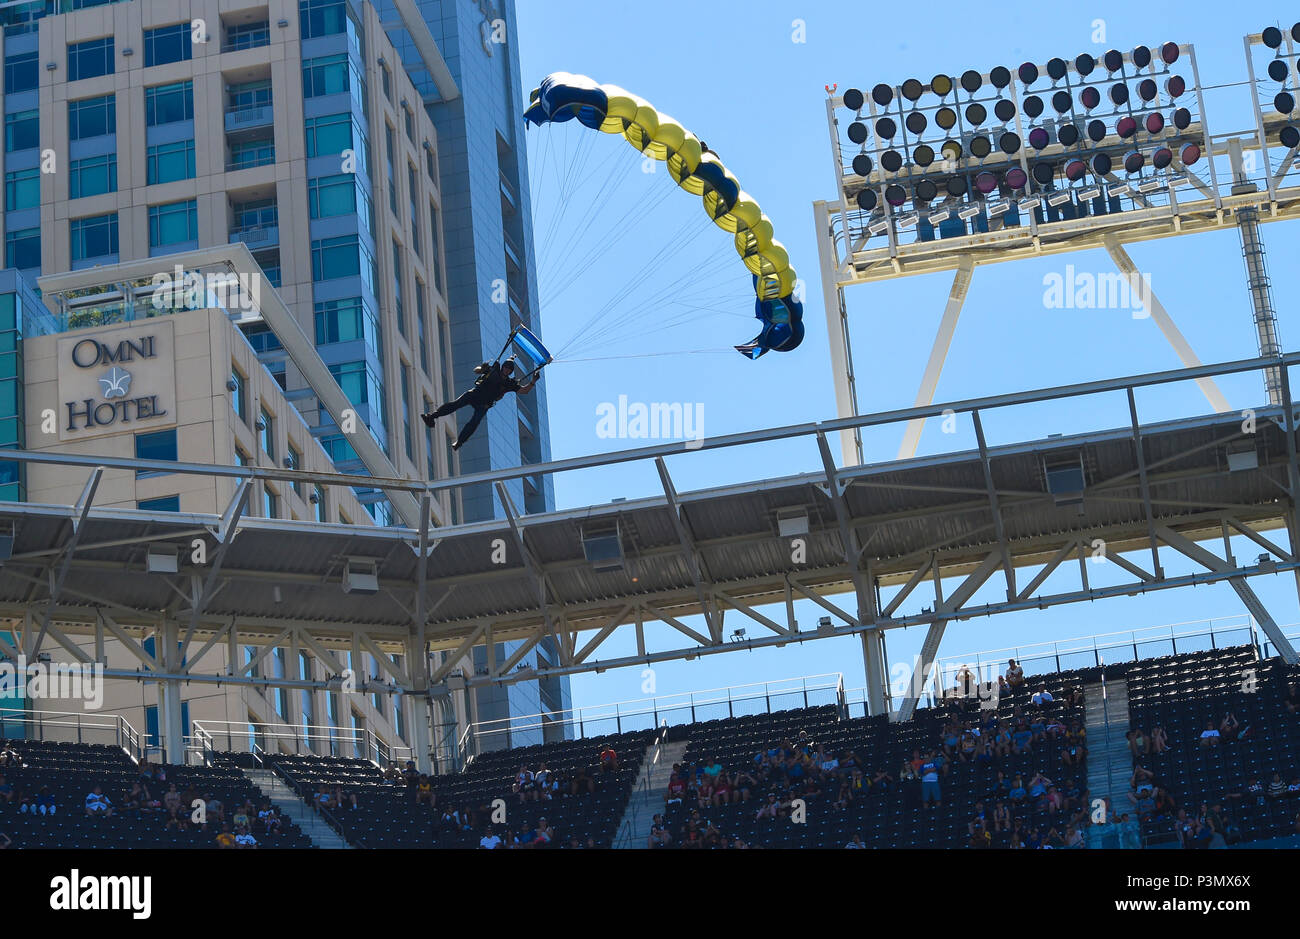 160710-N-VY375-077 SAN DIEGO (July 10, 2016) – Retired U.S. Navy SEAL Jim Woods, member of the U.S. Navy Parachute Team, the Leap Frogs, prepares to land during a demonstration at the Major League Baseball All-Star Futures Game above Petco Park. The Navy Parachute Team is based in San Diego and performs aerial parachute demonstrations around the nation in support of Naval Special Warfare and Navy recruiting. (U.S. Navy photo by Special Operator 1st Class Remington Peters/Released) Stock Photo